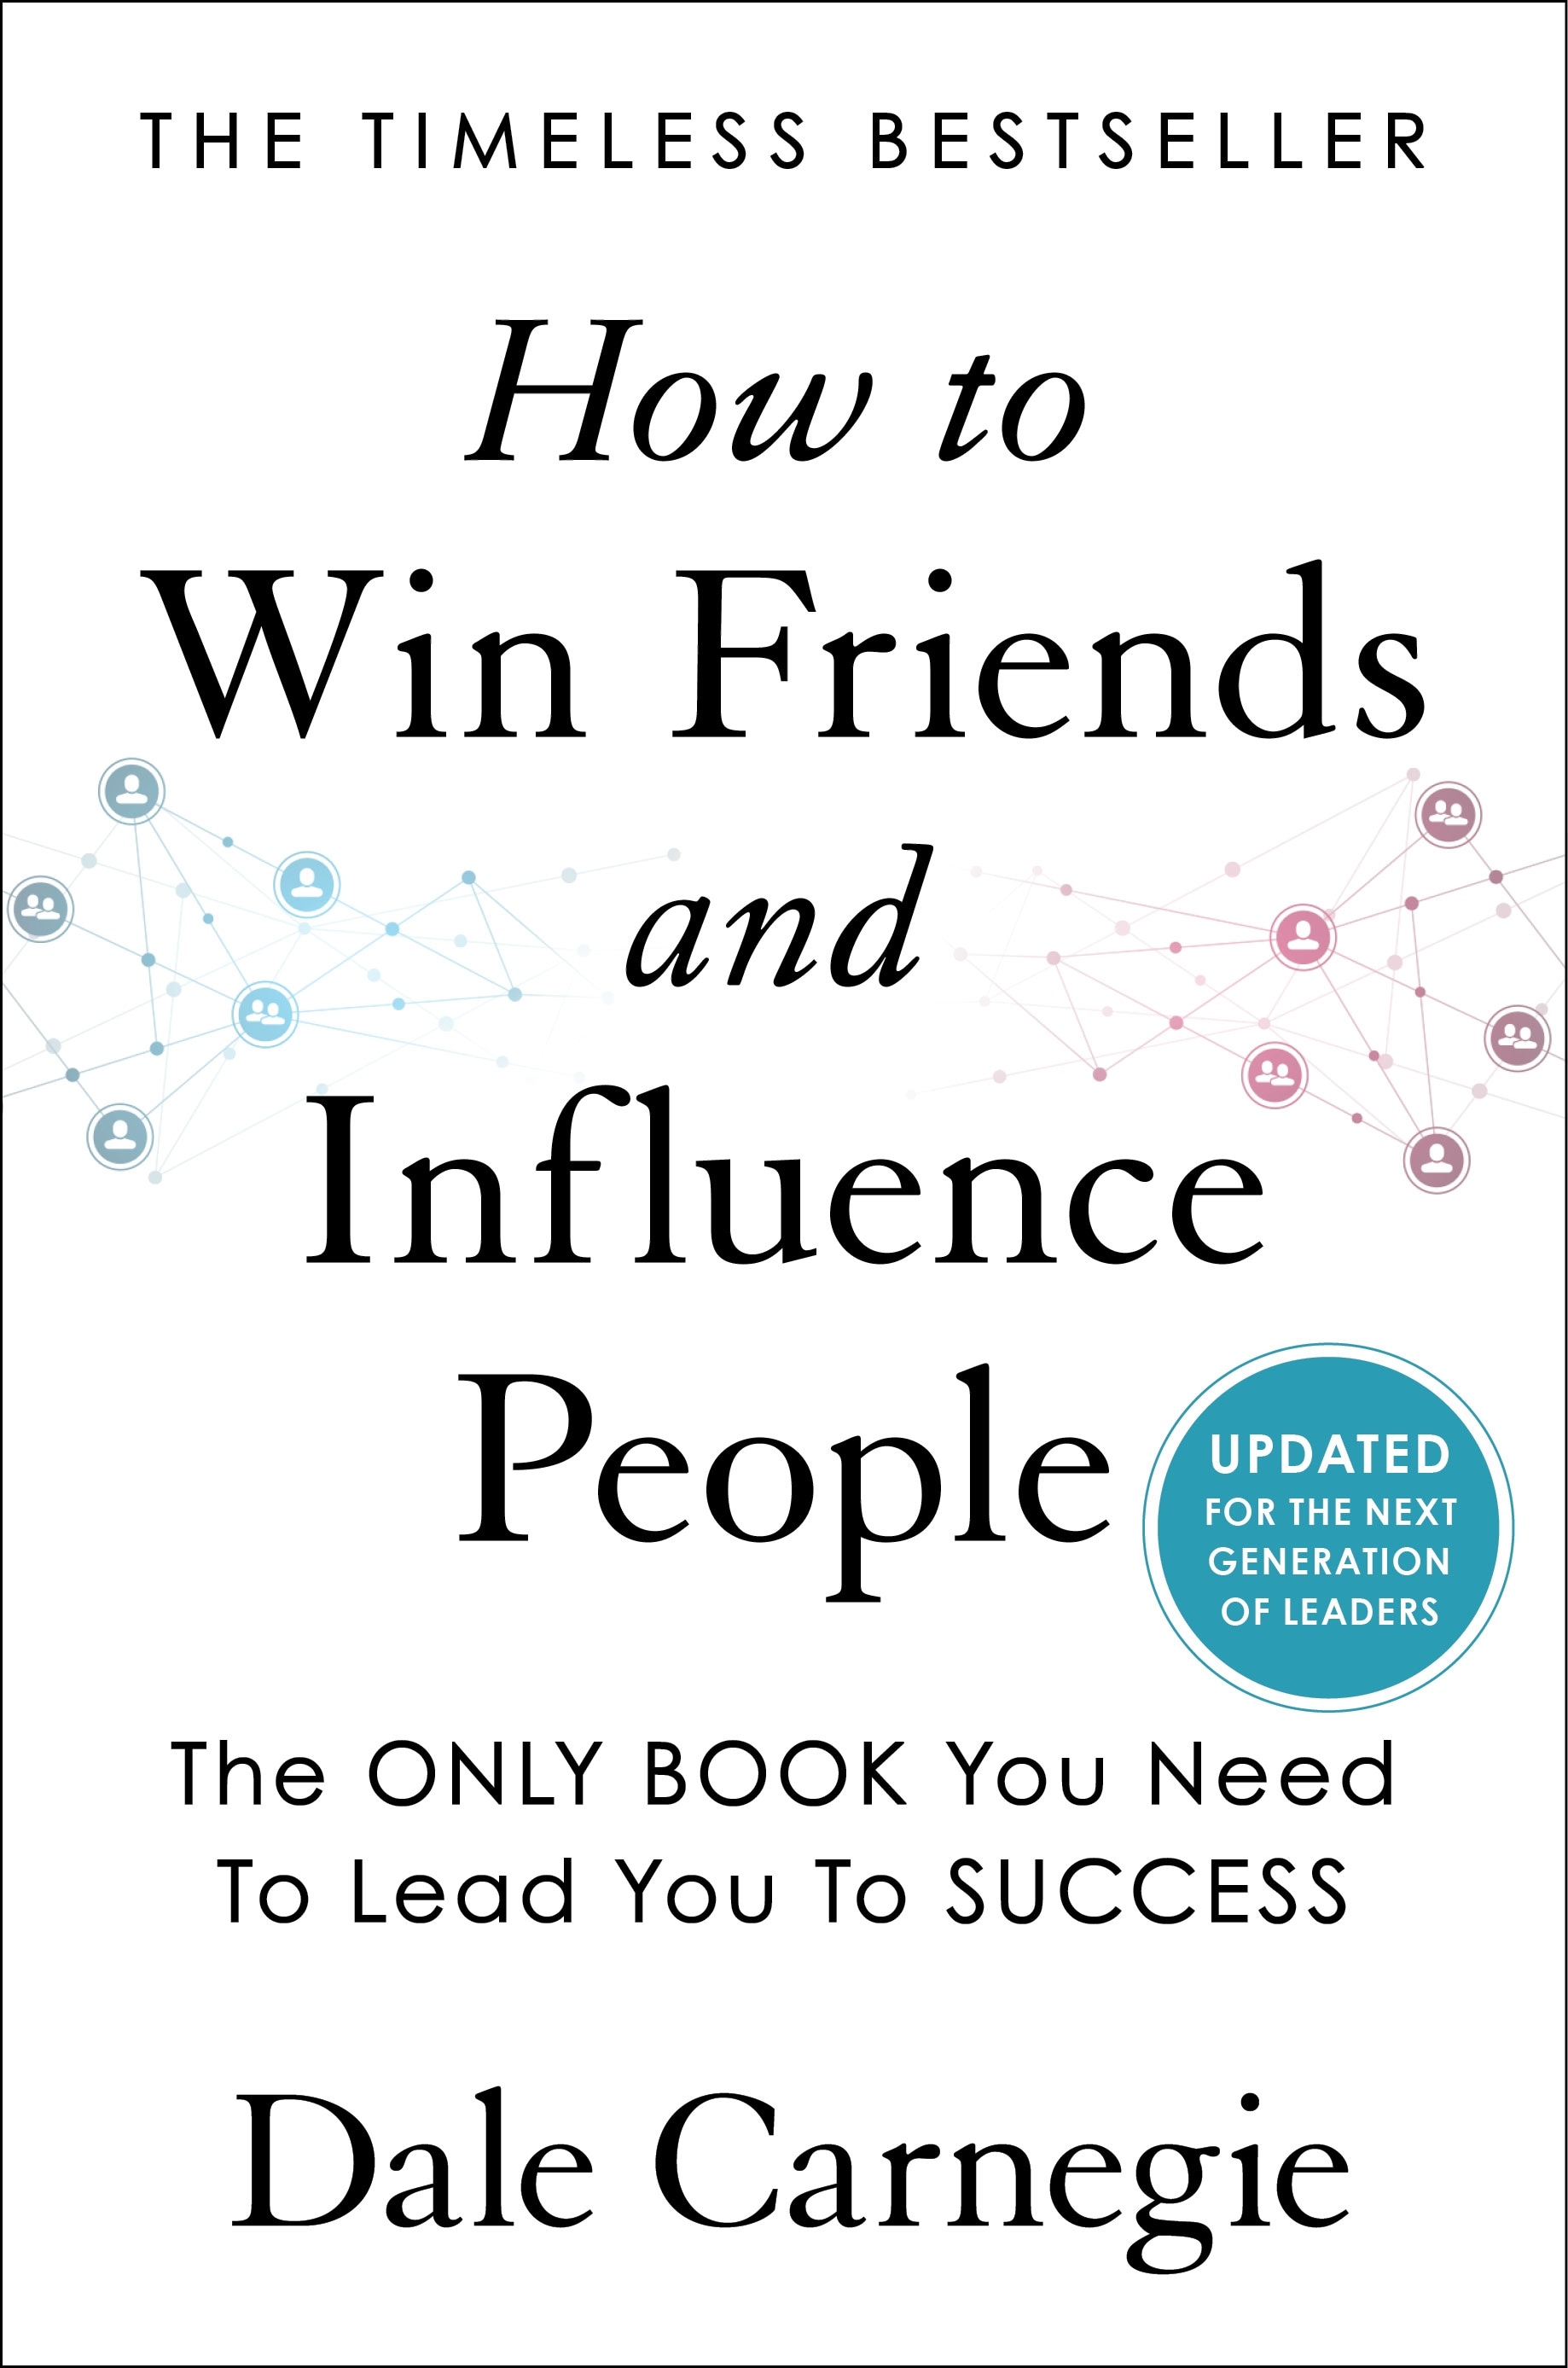 Book “How to Win Friends and Influence People” by Dale Carnegie — May 17, 2022